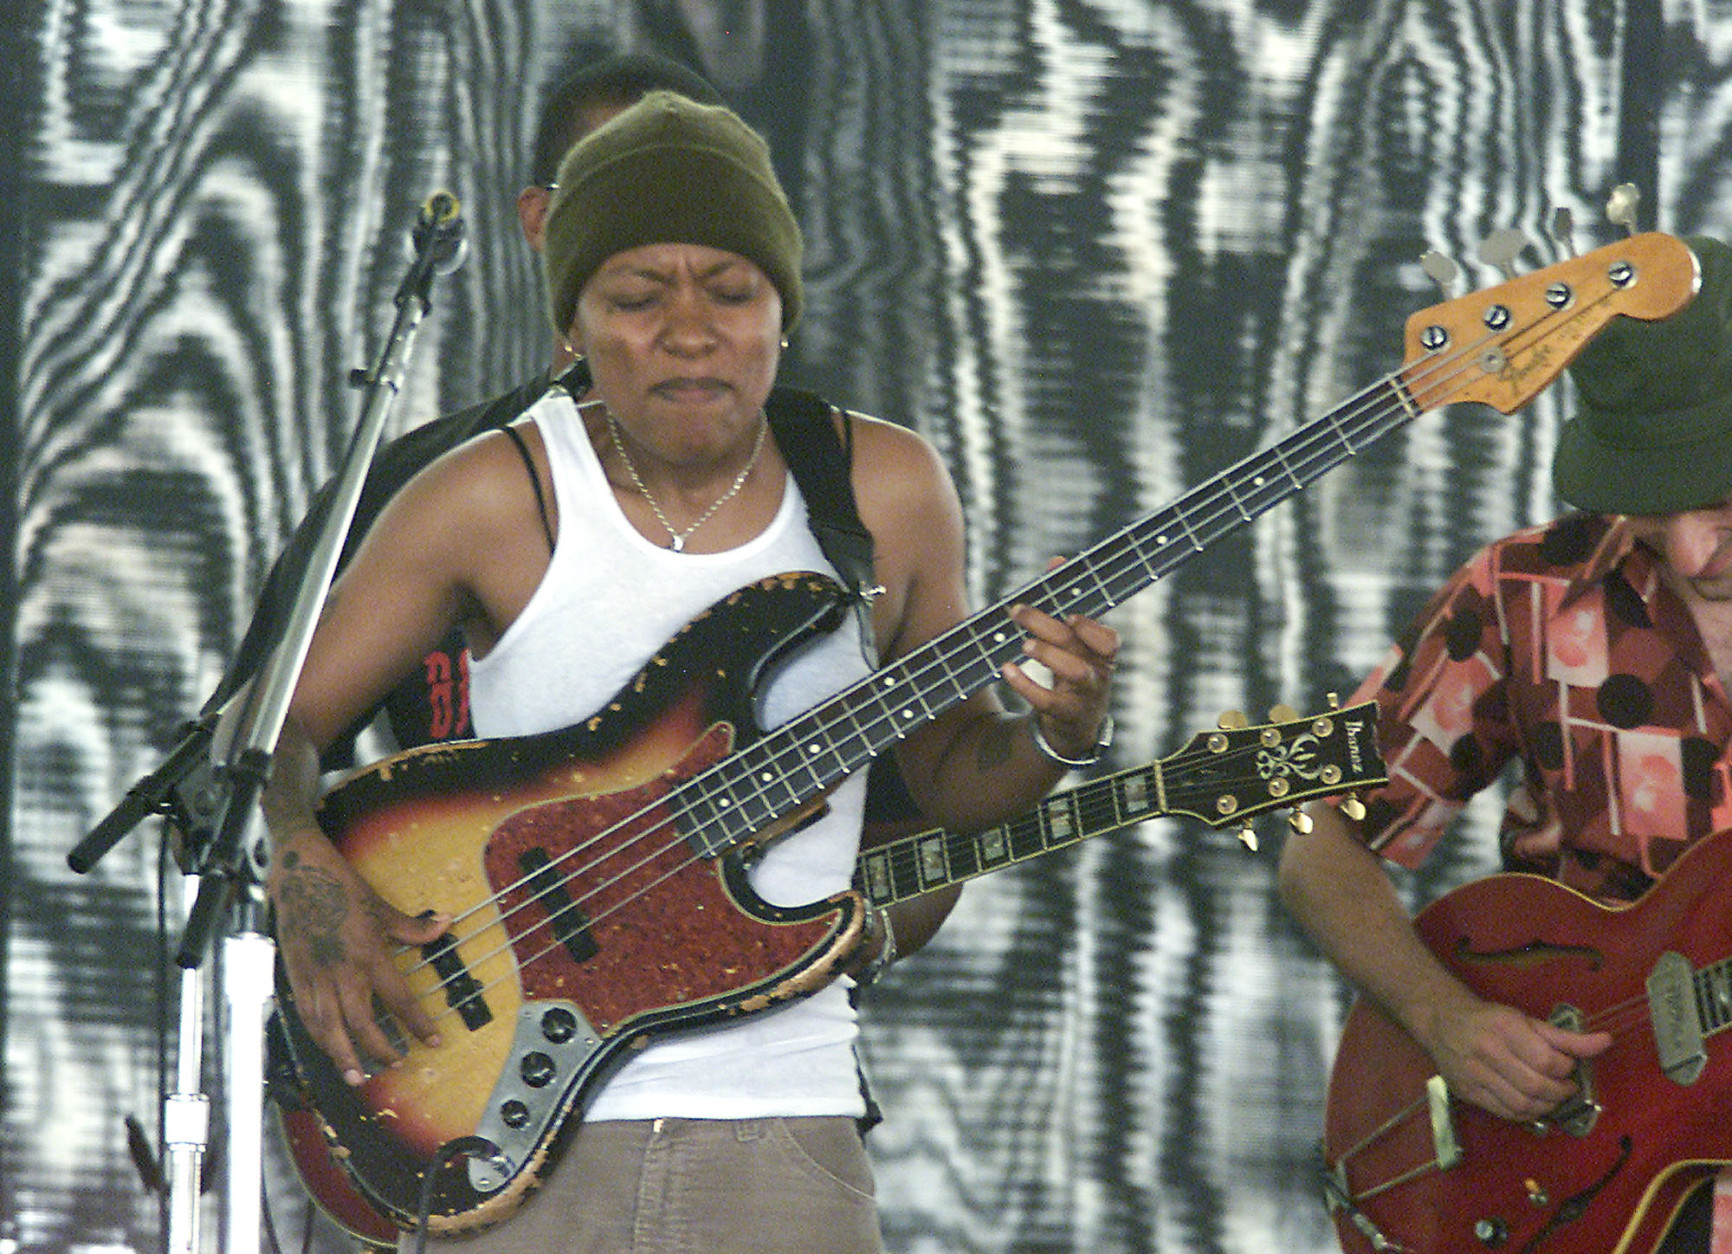 Me'Shell Ndegeocello, lead singer and bass player, performs a set with her band at the JVC Jazz Festival in Newport, R.I., Sunday, Aug. 10, 2003. (AP Photo/Stew Milne)